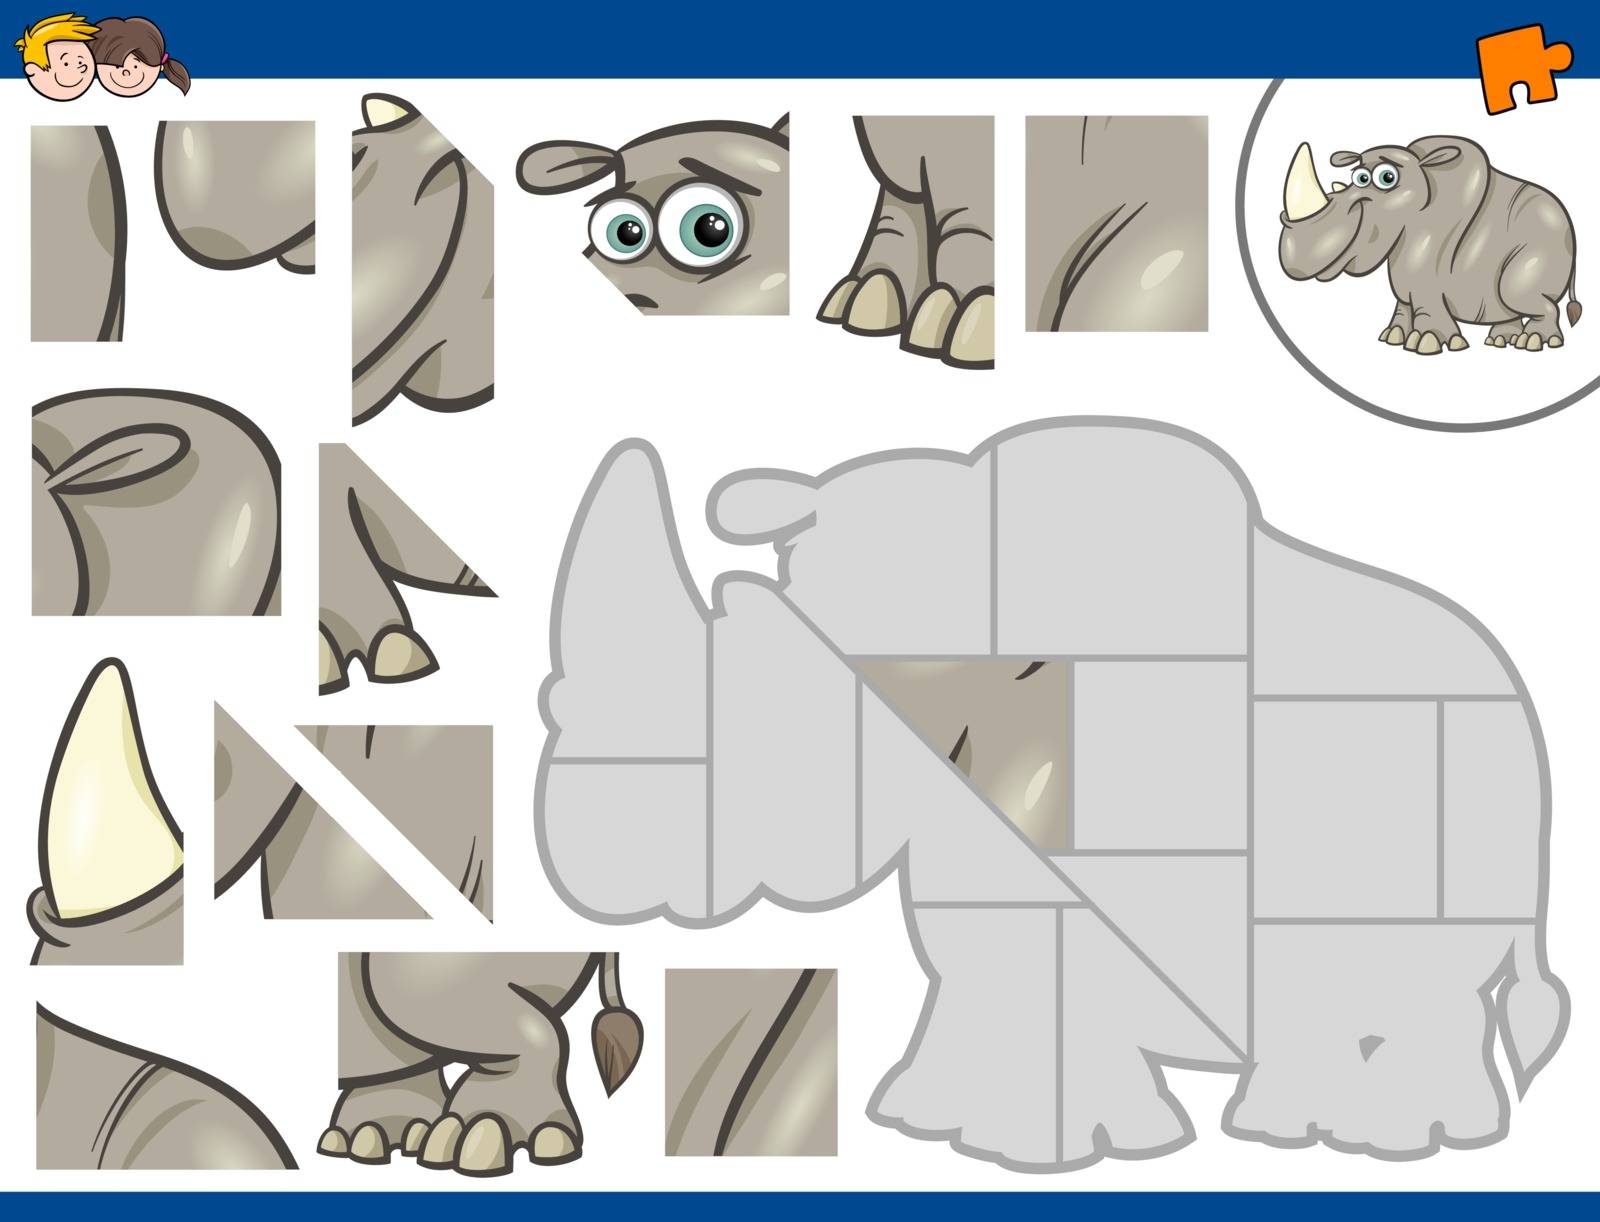 Cartoon Illustration of Educational Jigsaw Puzzle Activity for Preschool Children with Rhinoceros Animal Character